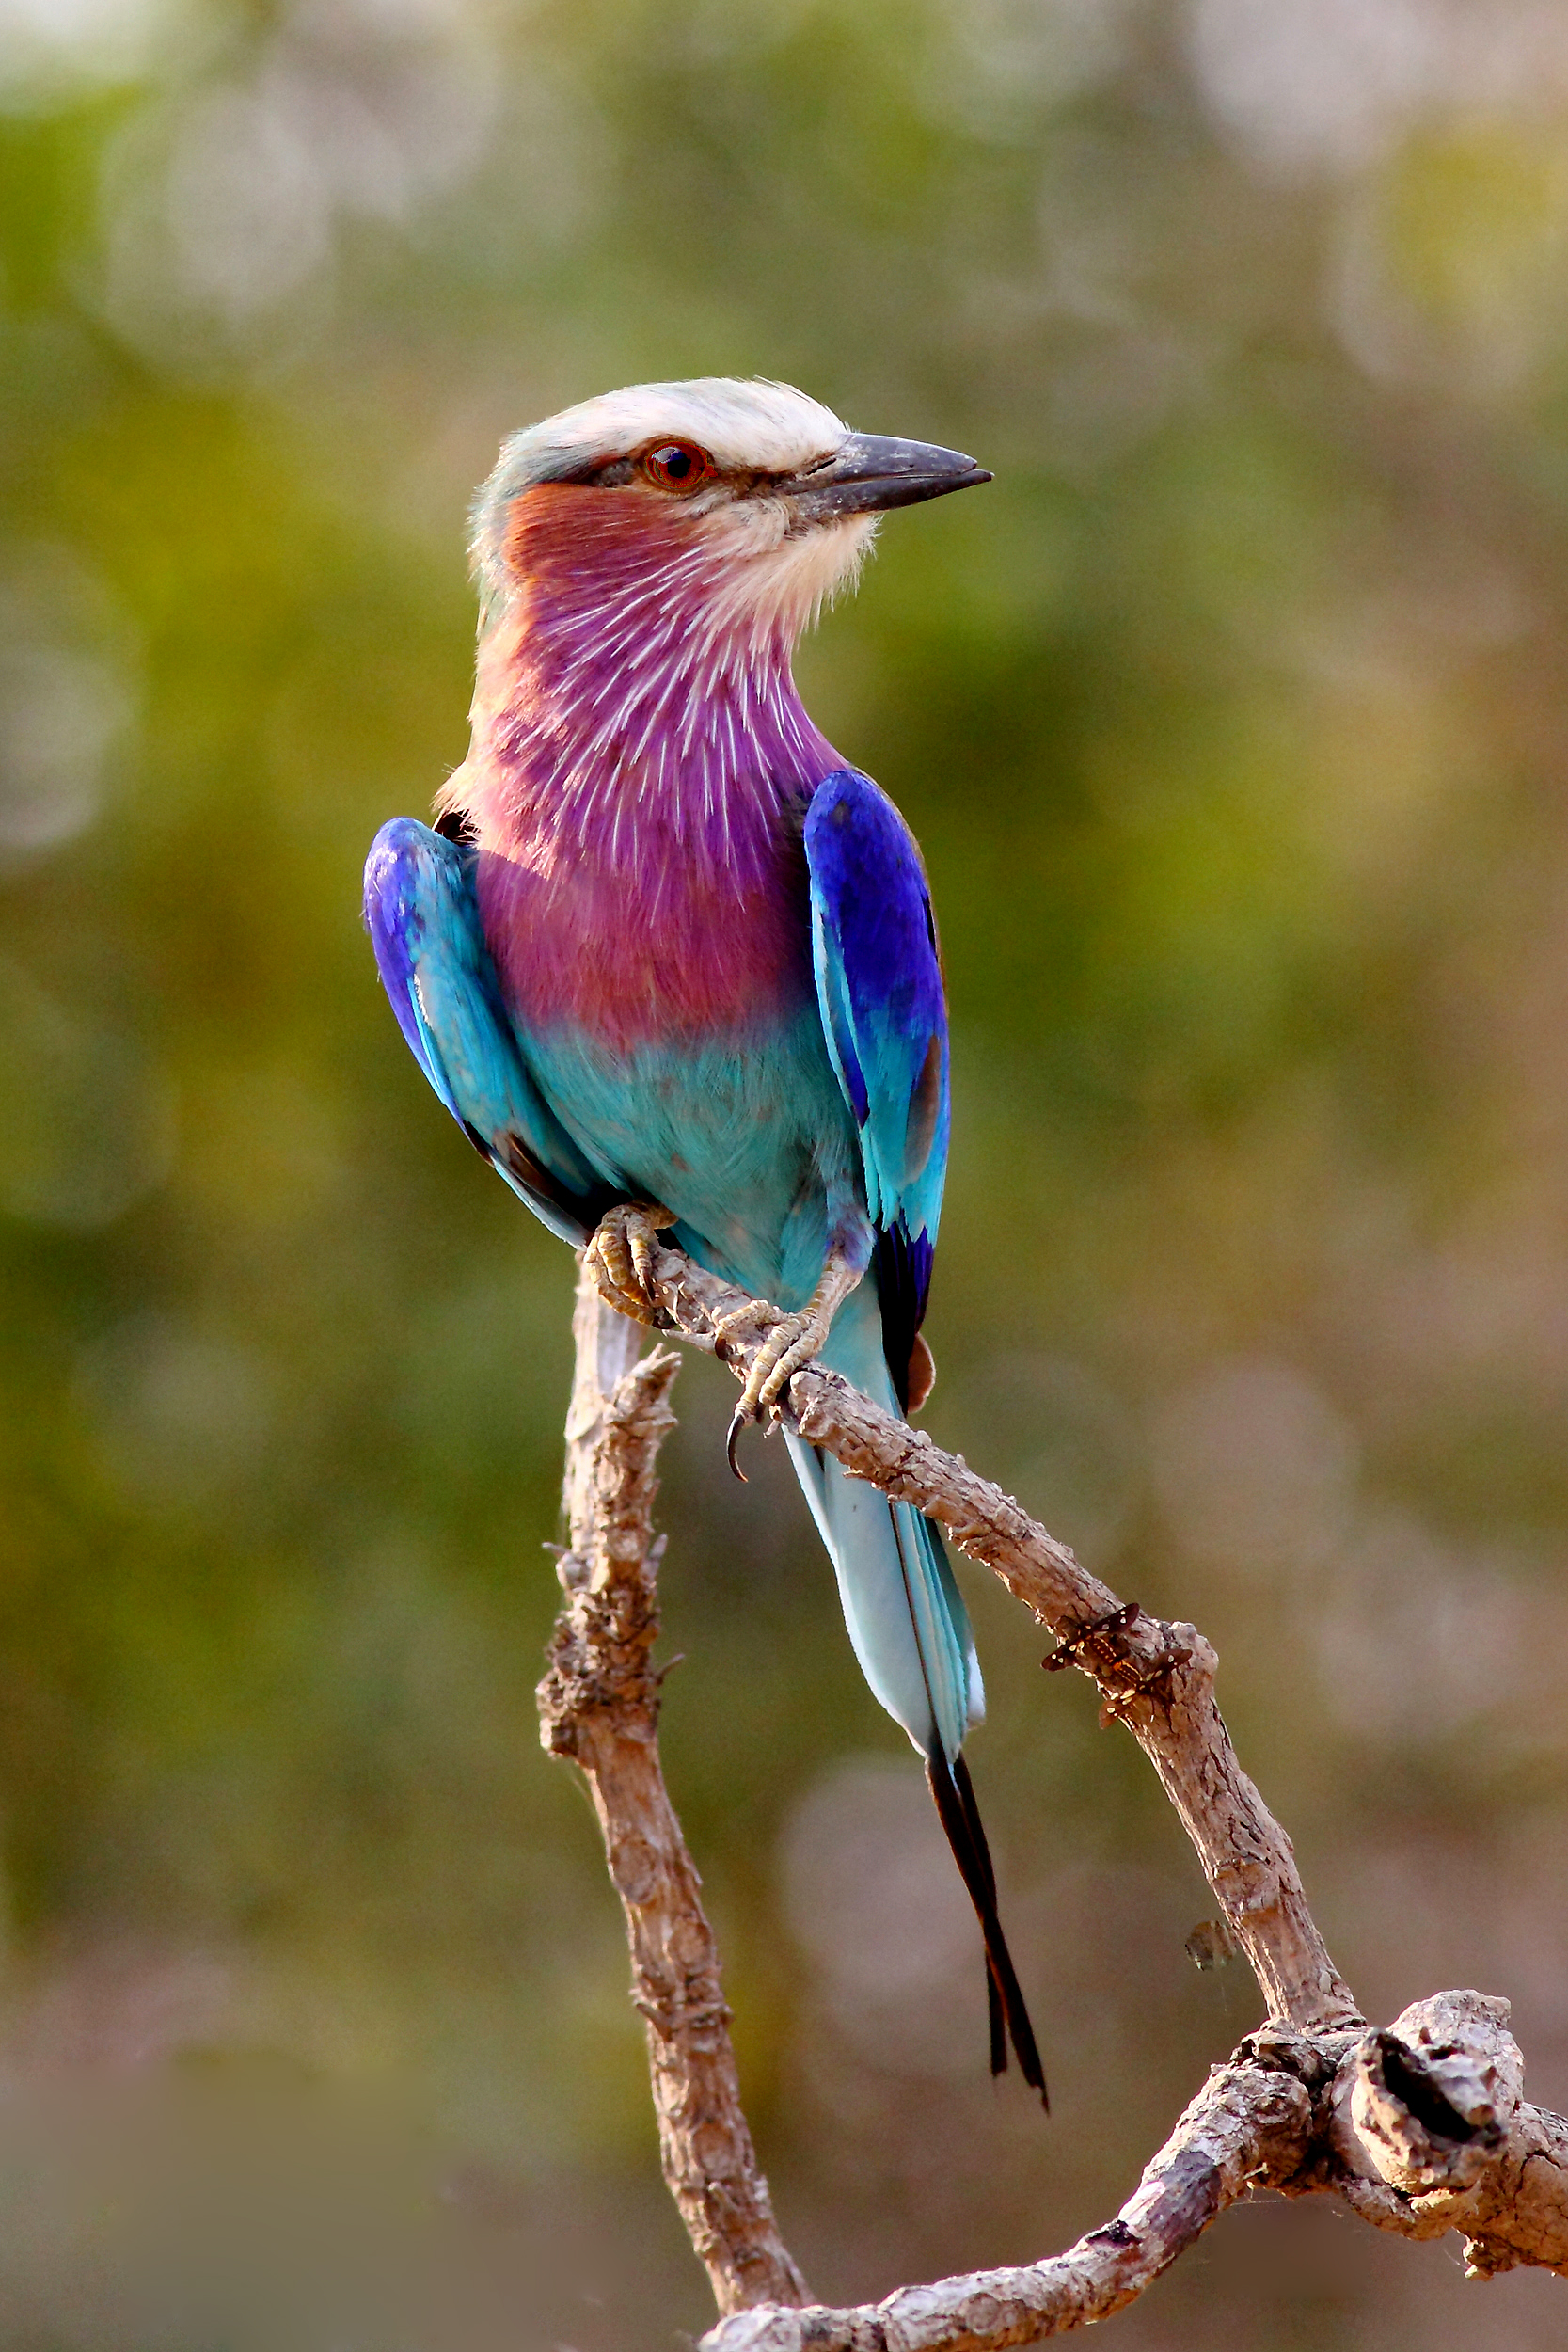 File:Lilac Breasted Roller Face.jpg - Wikimedia Commons